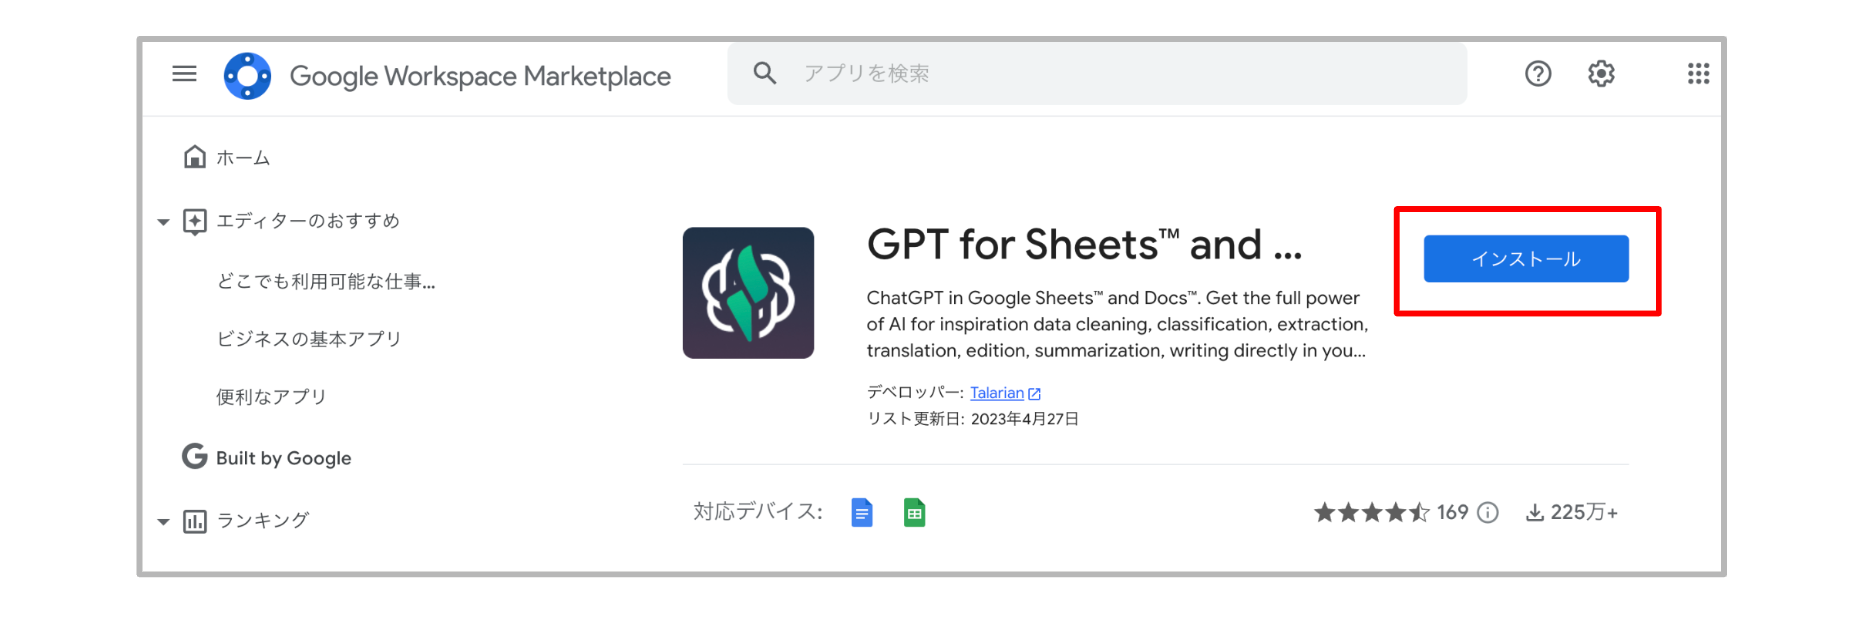 GPT for Sheets and Docs をインストール